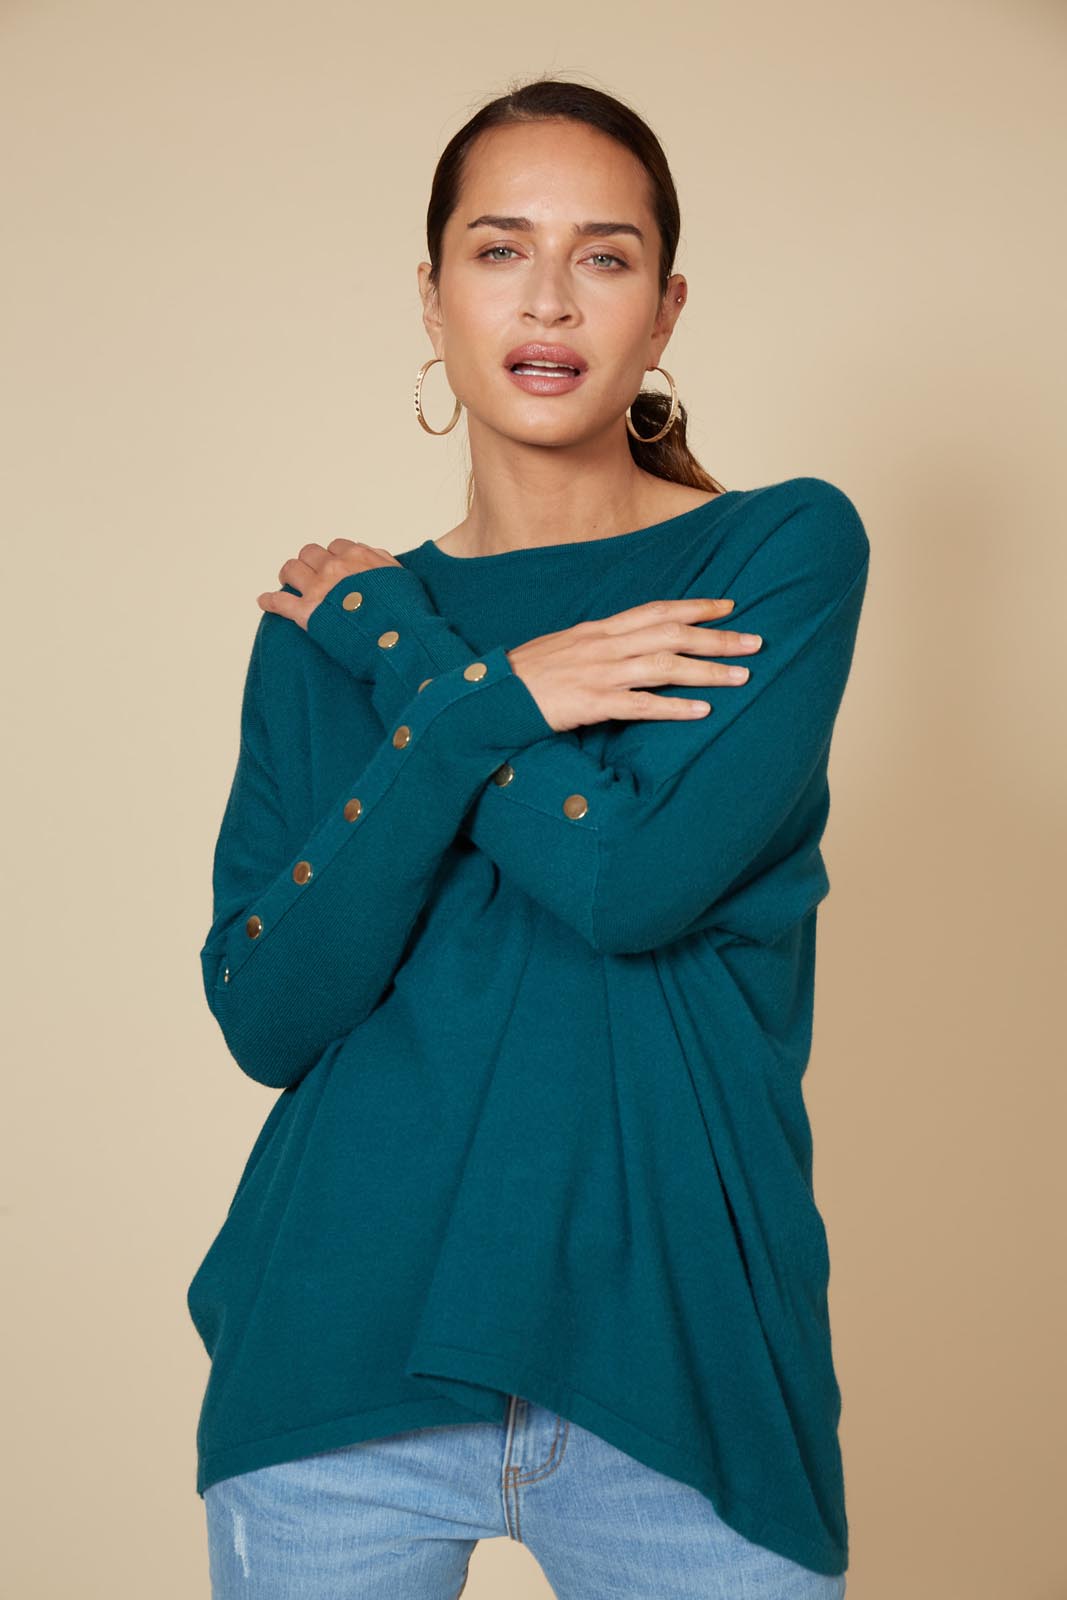 Kit Button Knit - Teal - eb&ive Clothing - Knit Jumper One Size